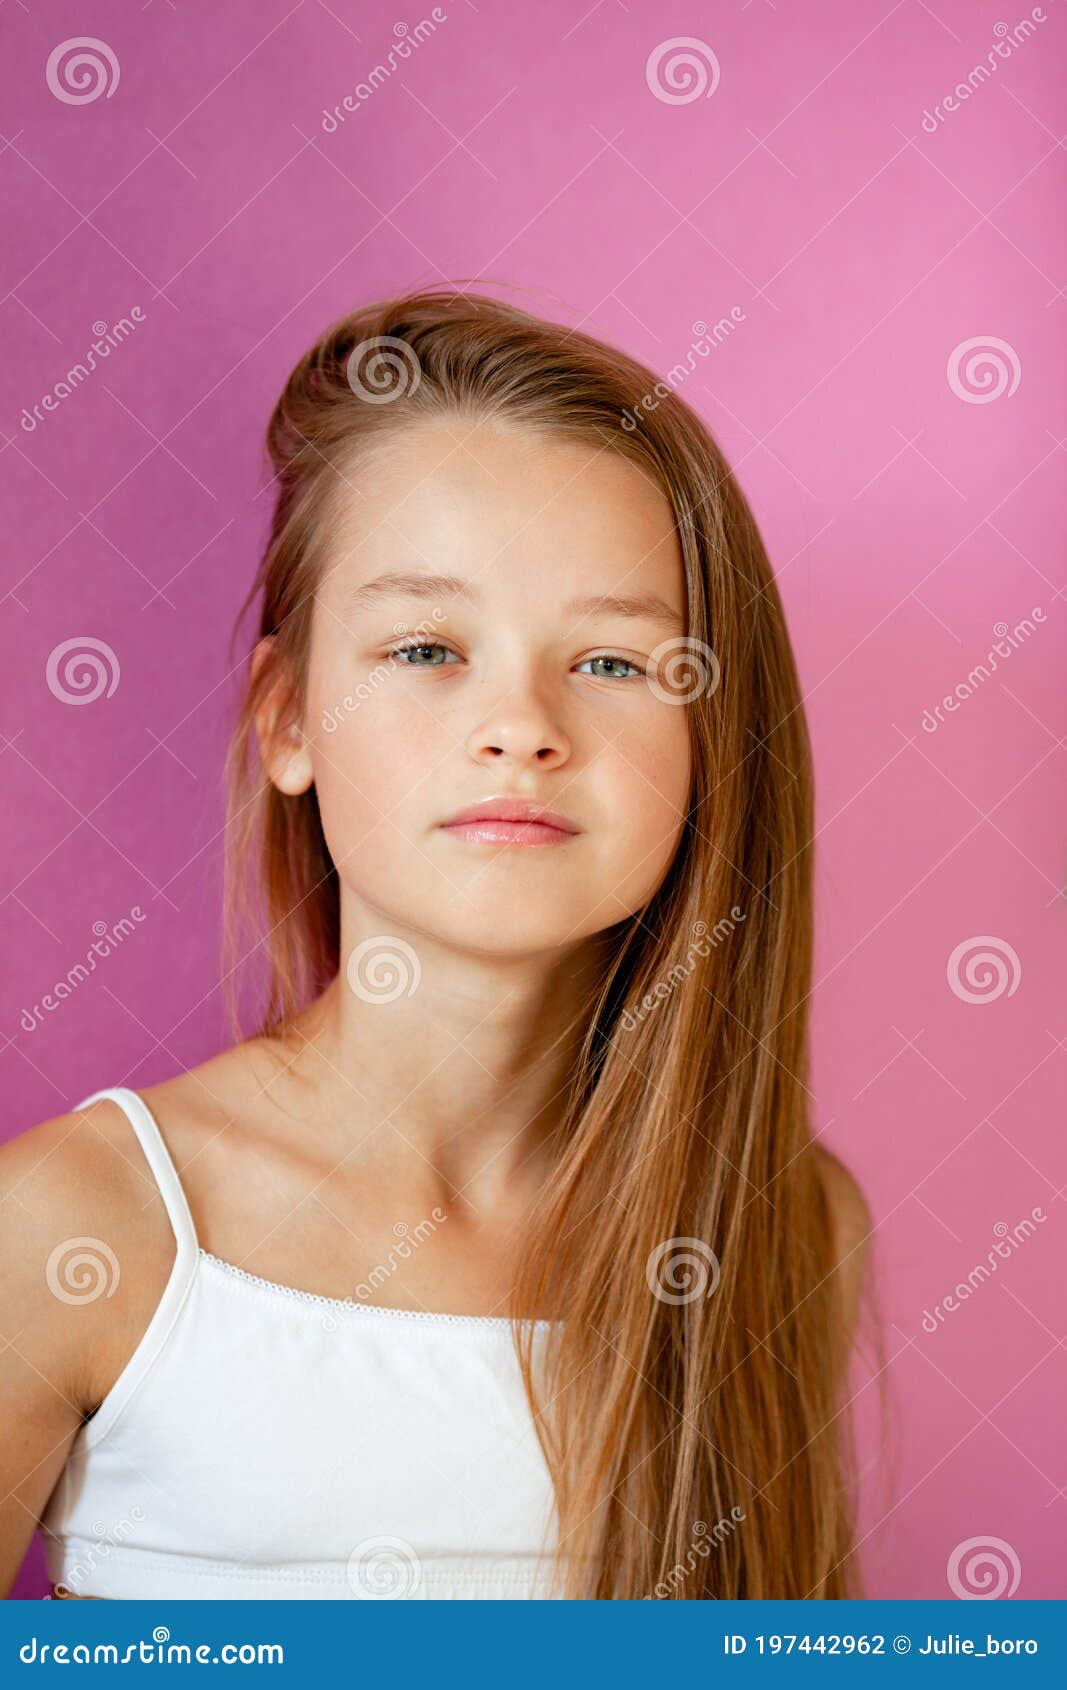 Portrait Of A Gentle 9 Year Old Long Haired Girl In A Light T Shirt